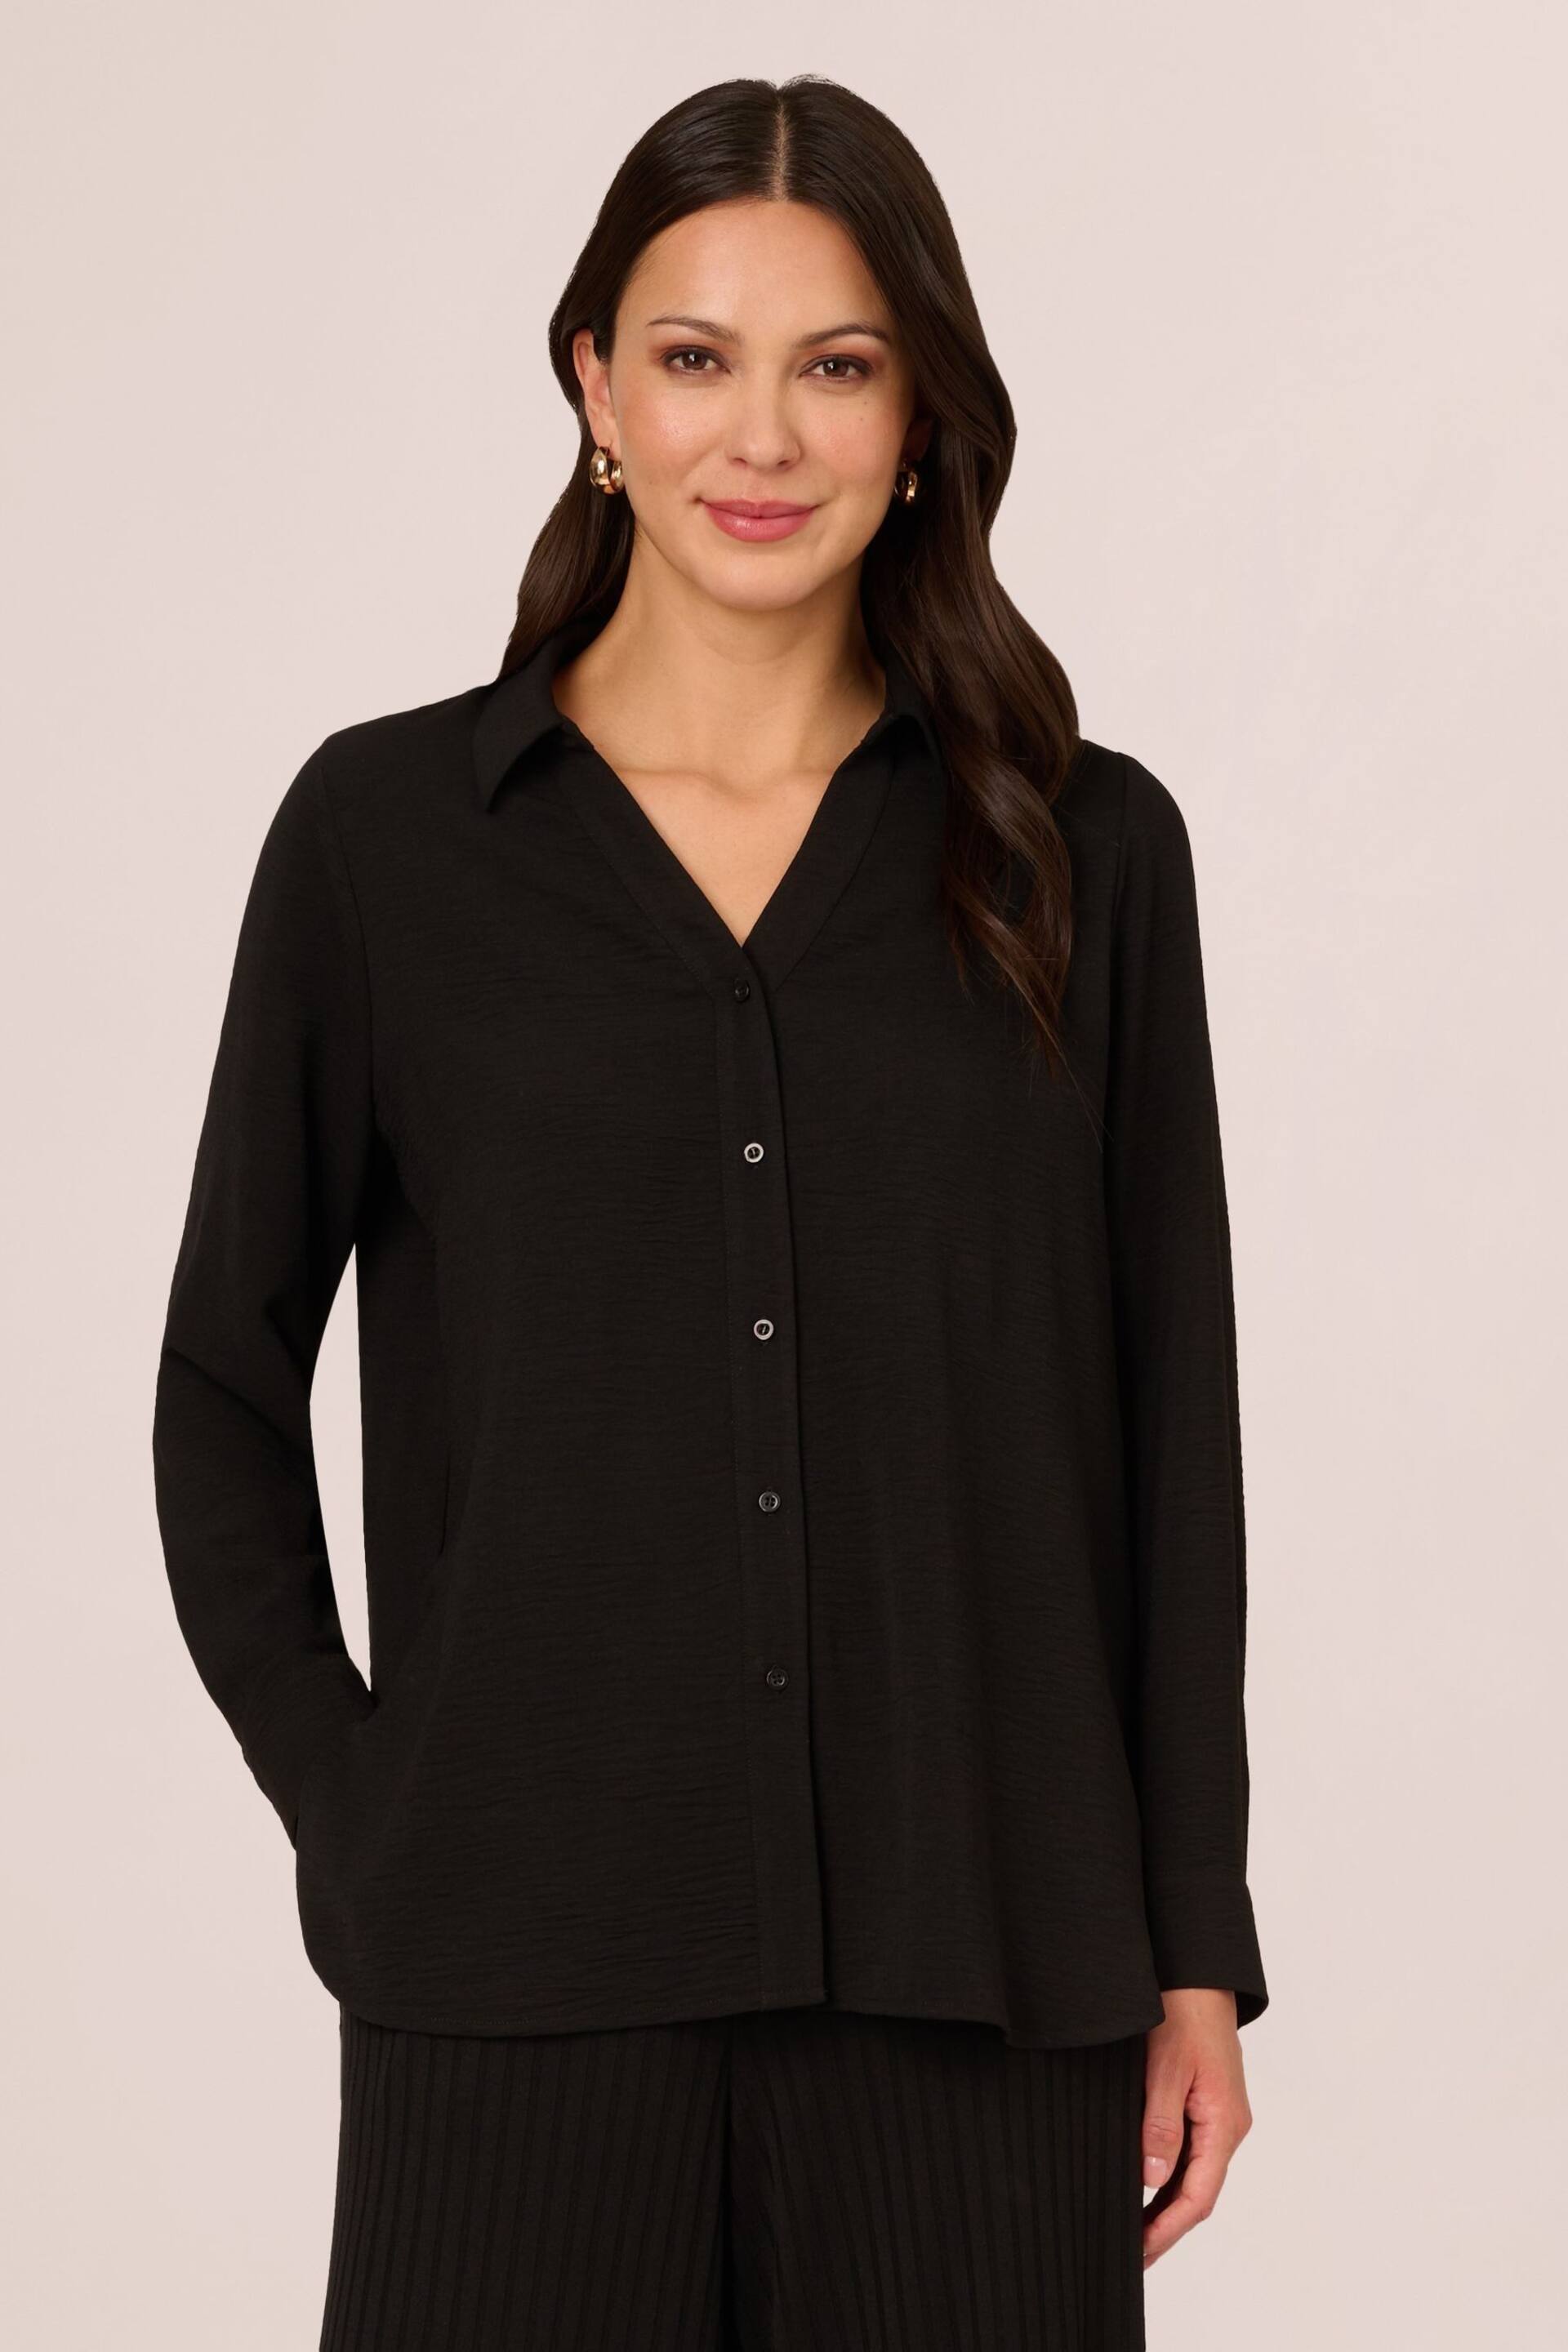 Adrianna Papell Solid Texture Airflow Woven Long Sleeve V-Collar Black Shirt - Image 1 of 6